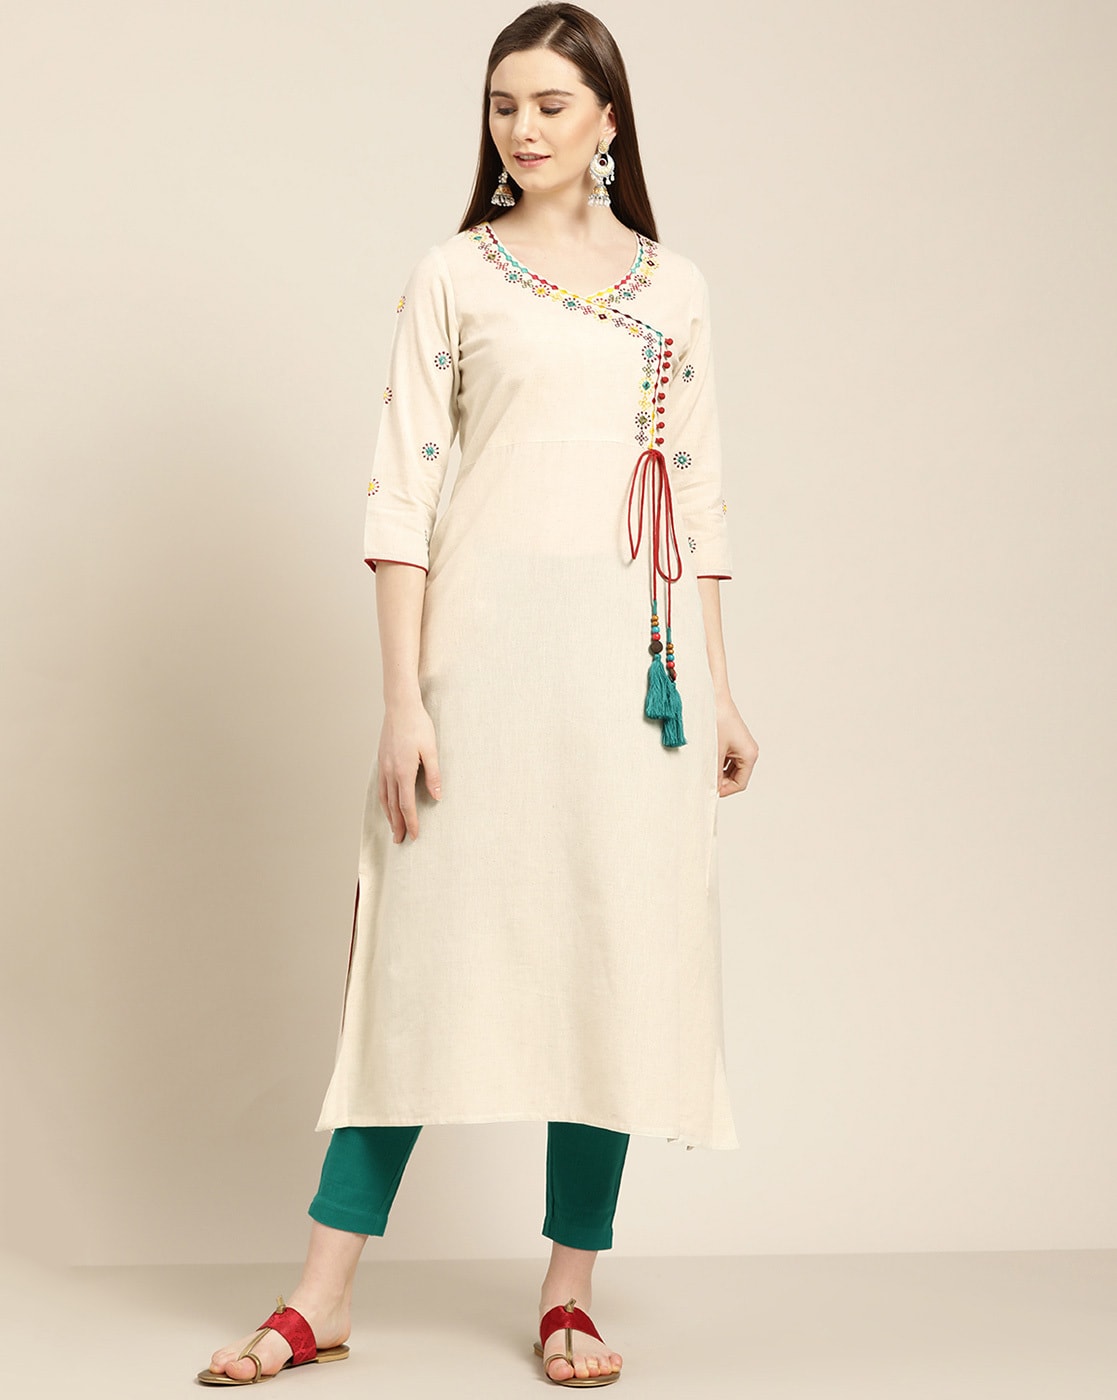 Buy Latest Designer Kurtis Online for Woman | Handloom, Cotton, Silk  Designer Kurtis Online - Sujatra – Page 3